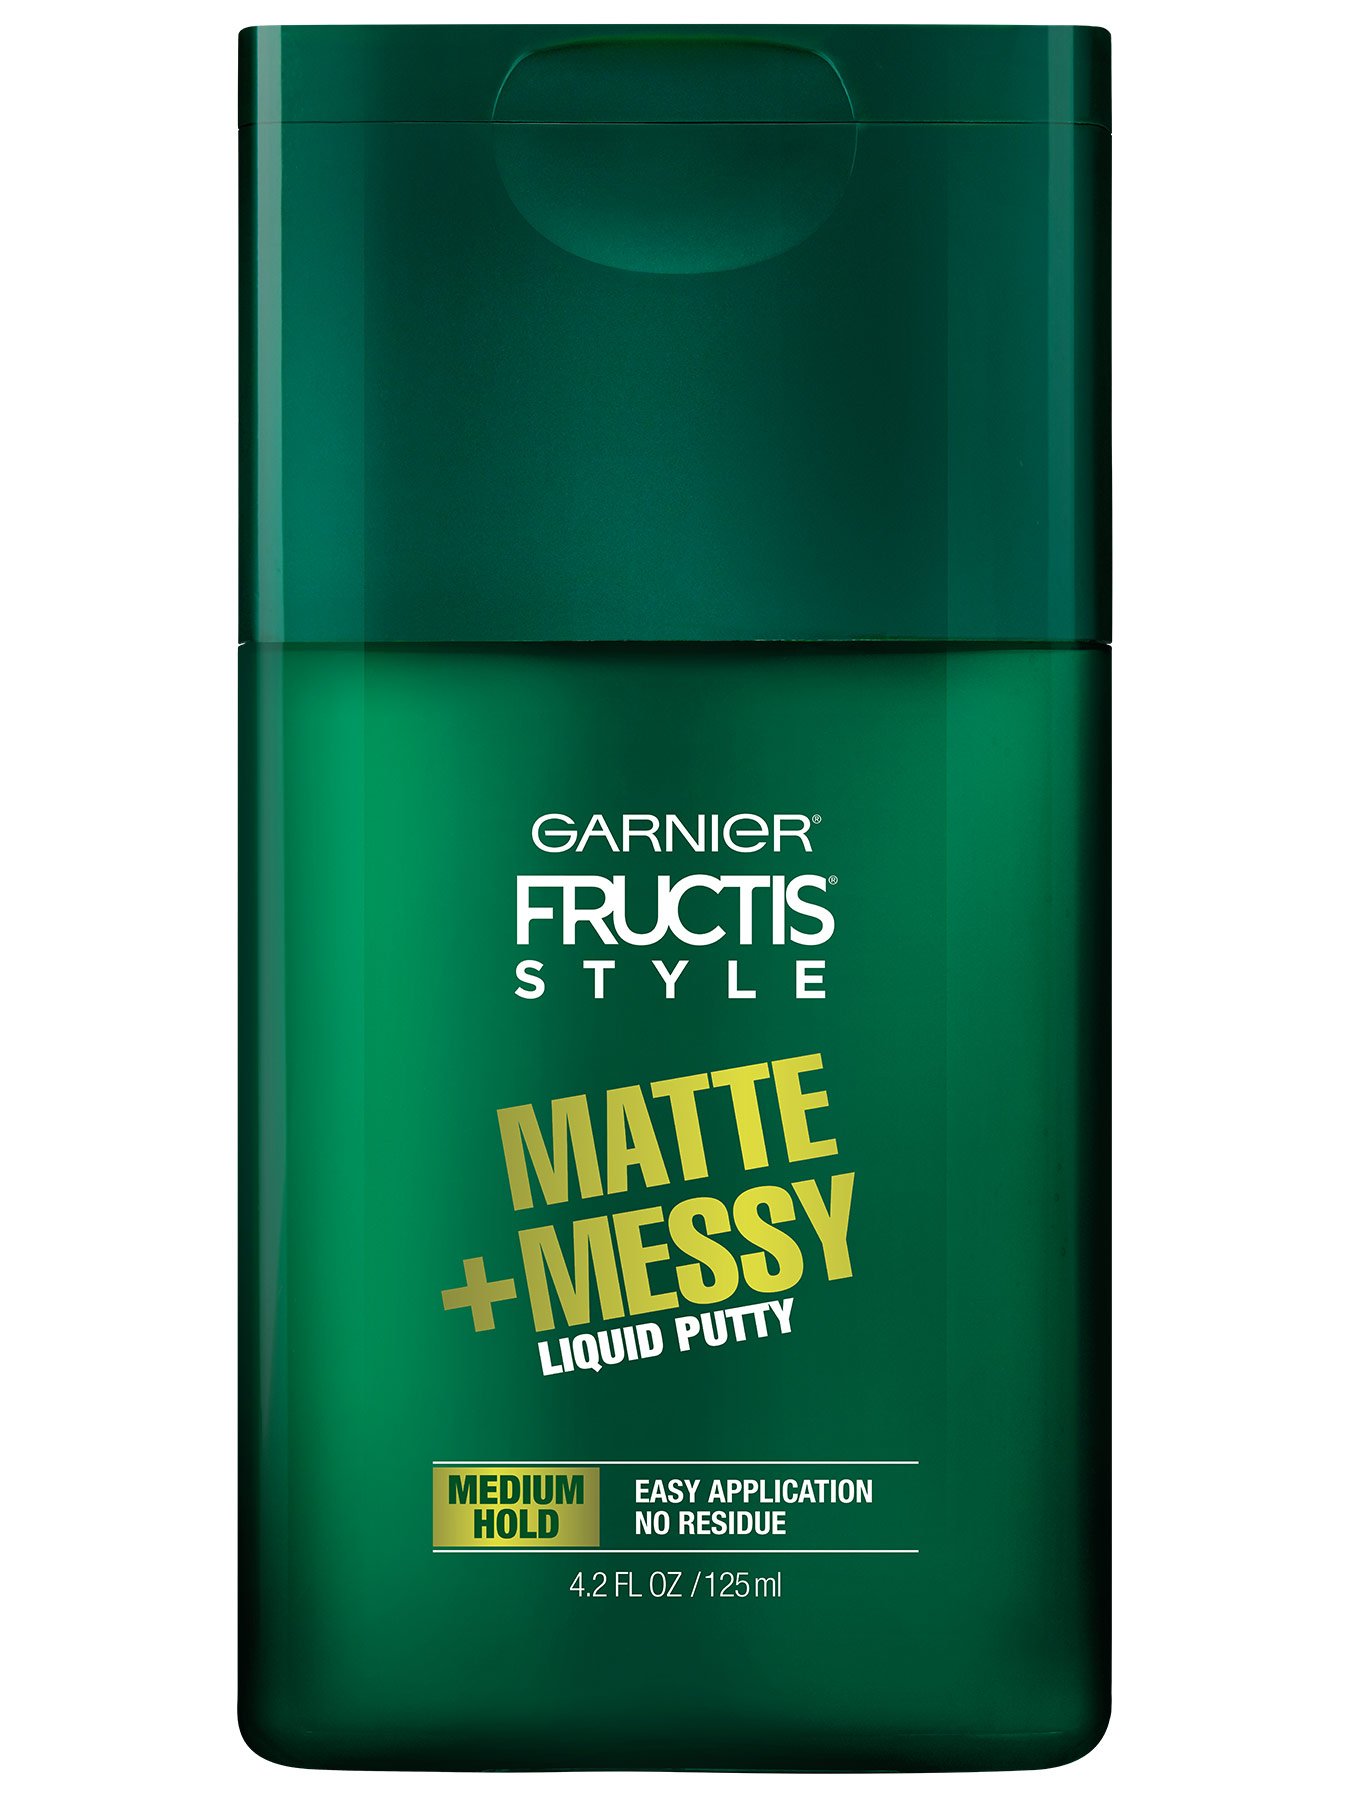 Front view of Matte and Messy Liquid Hair Putty for Men, No Drying Alcohol.